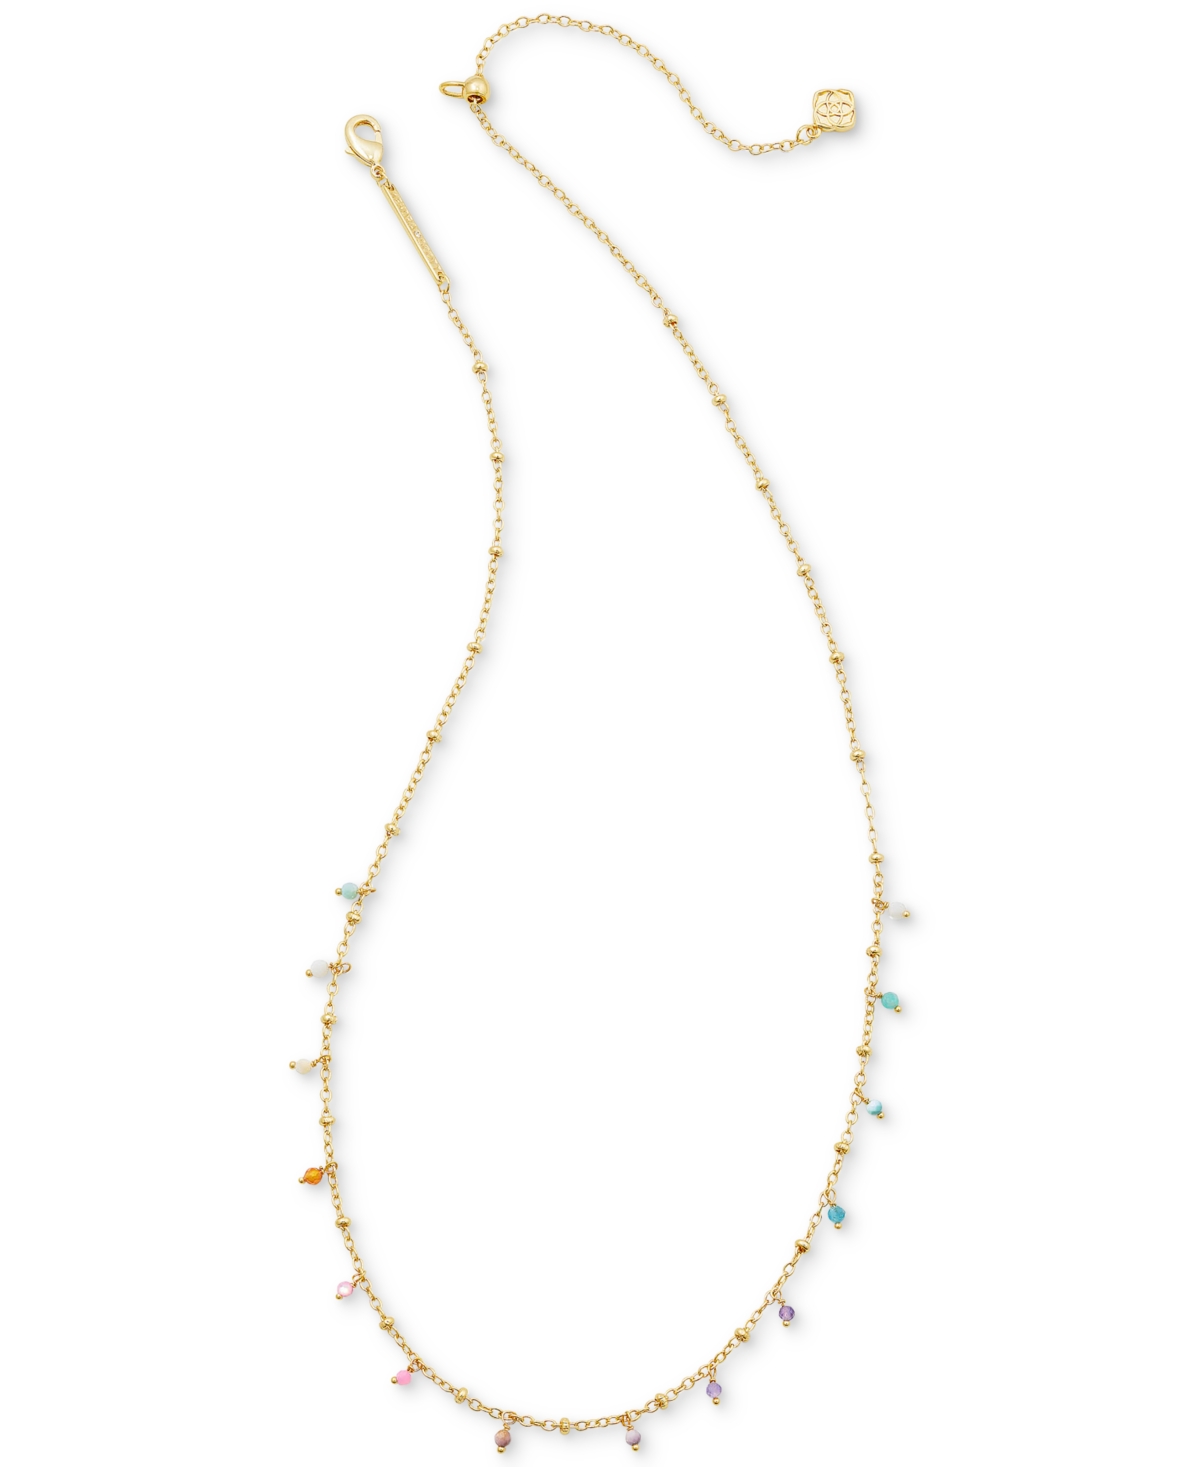 Kendra Scott Gold-tone Camry Beaded Strand 19" Necklace In Iridescent Abalone